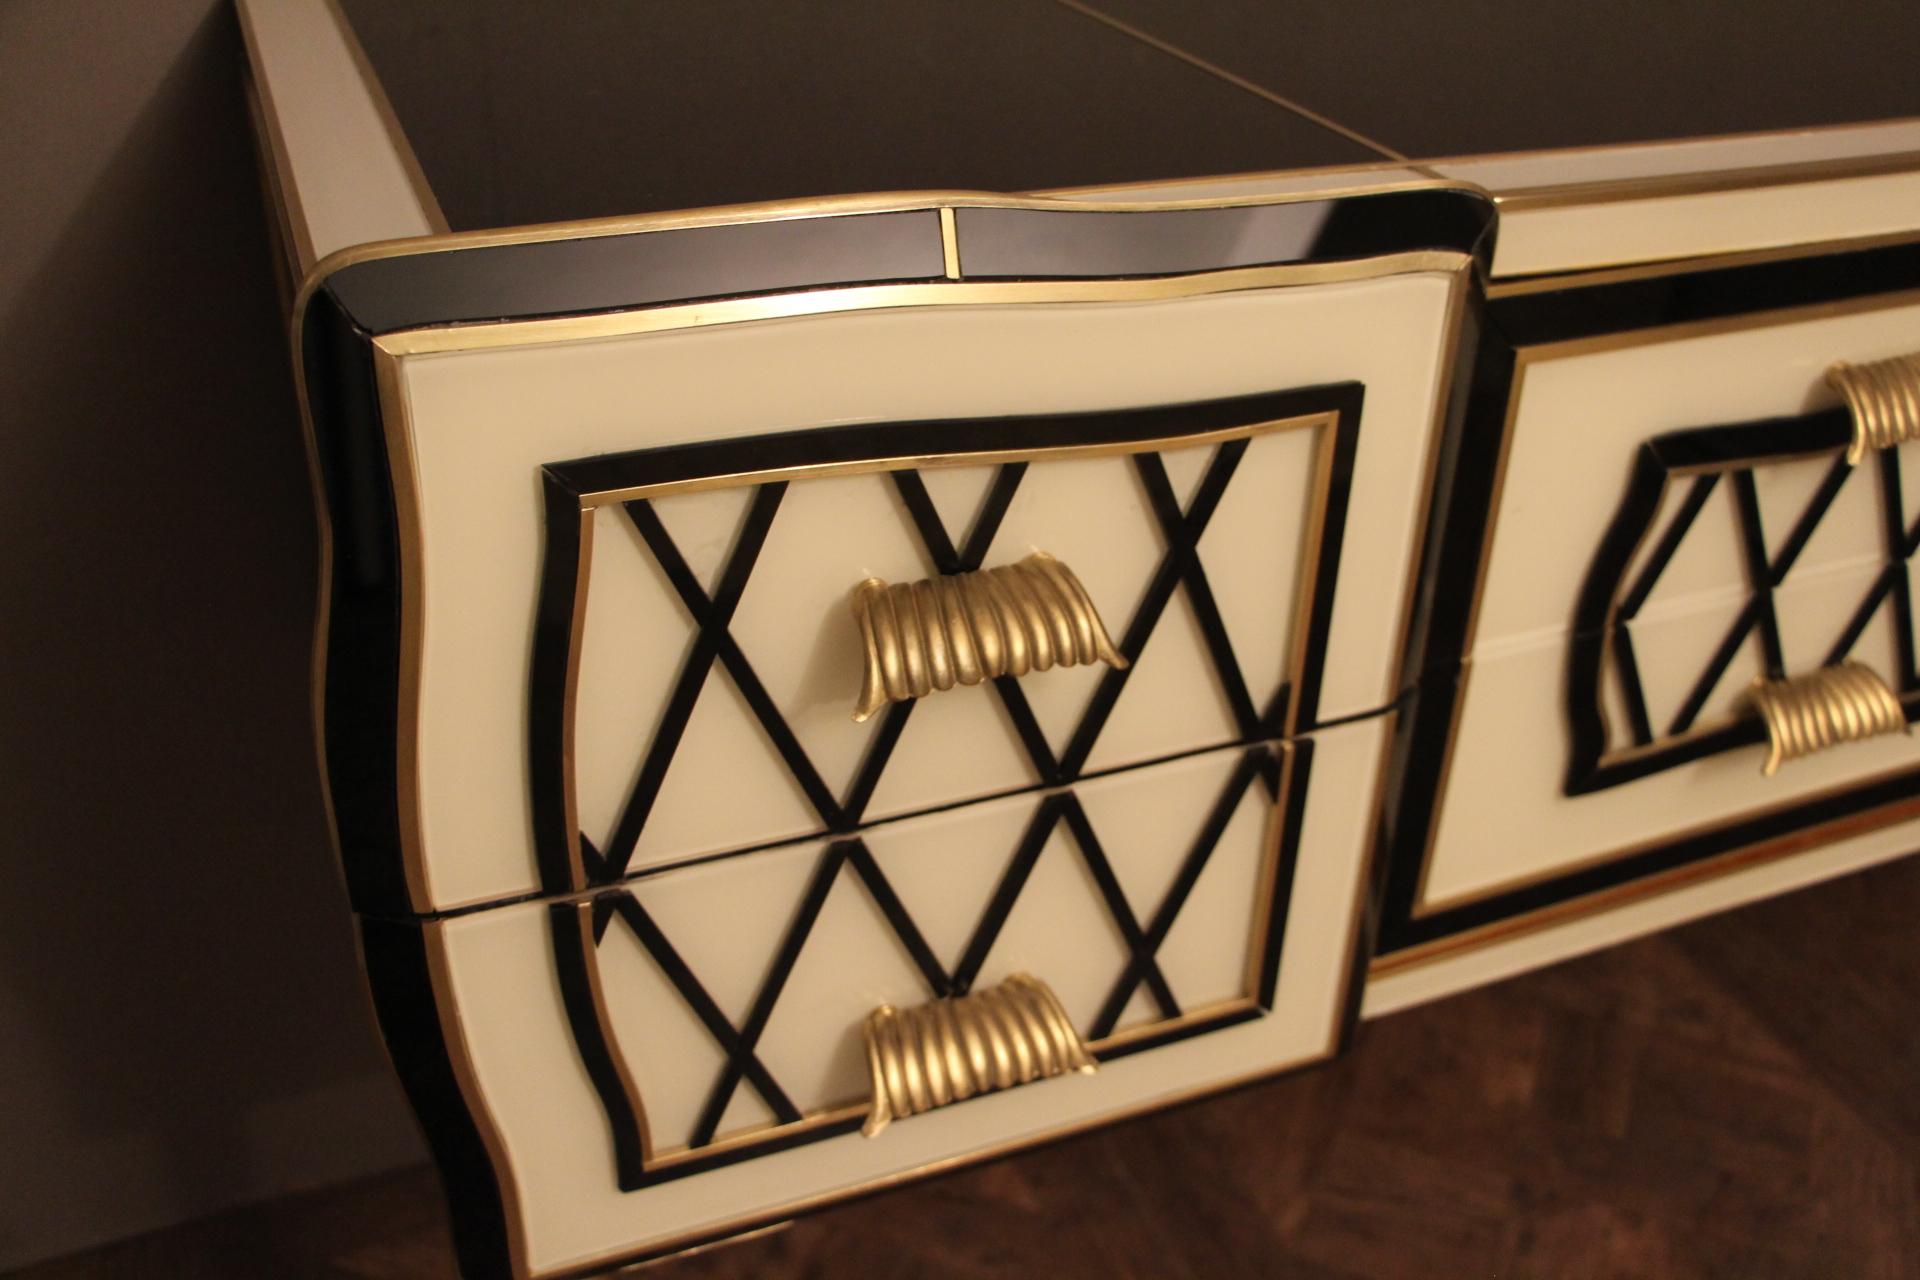 Very refined, this elegant sideboard features an eye-catching geometrical decor made of Murano glass plaques and brass inlay. Black glass segments in relief make crossbars.
It has got 2 deep drawers on each side and 2 long drawers in the middle.